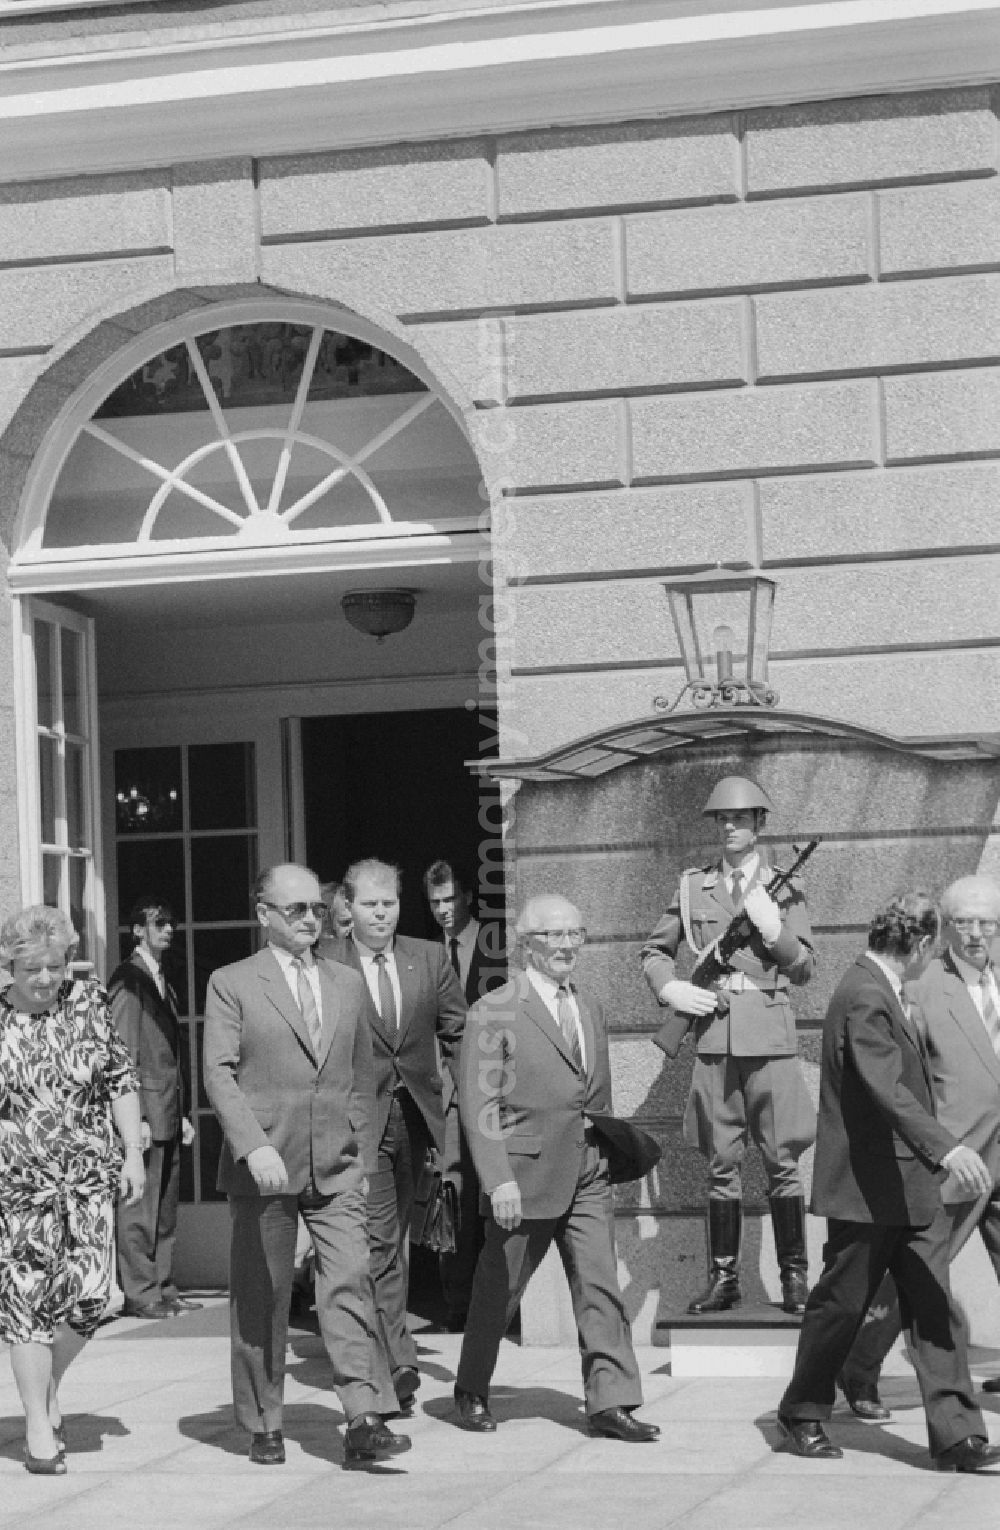 Berlin: The Polish Prime Minister General Wojciech Jaruzelski in East Berlin (GDR) with his host, the state Erich Honecker in the palace Niederschoenhausen in Berlin, the former capital of the GDR, the German Democratic Republic